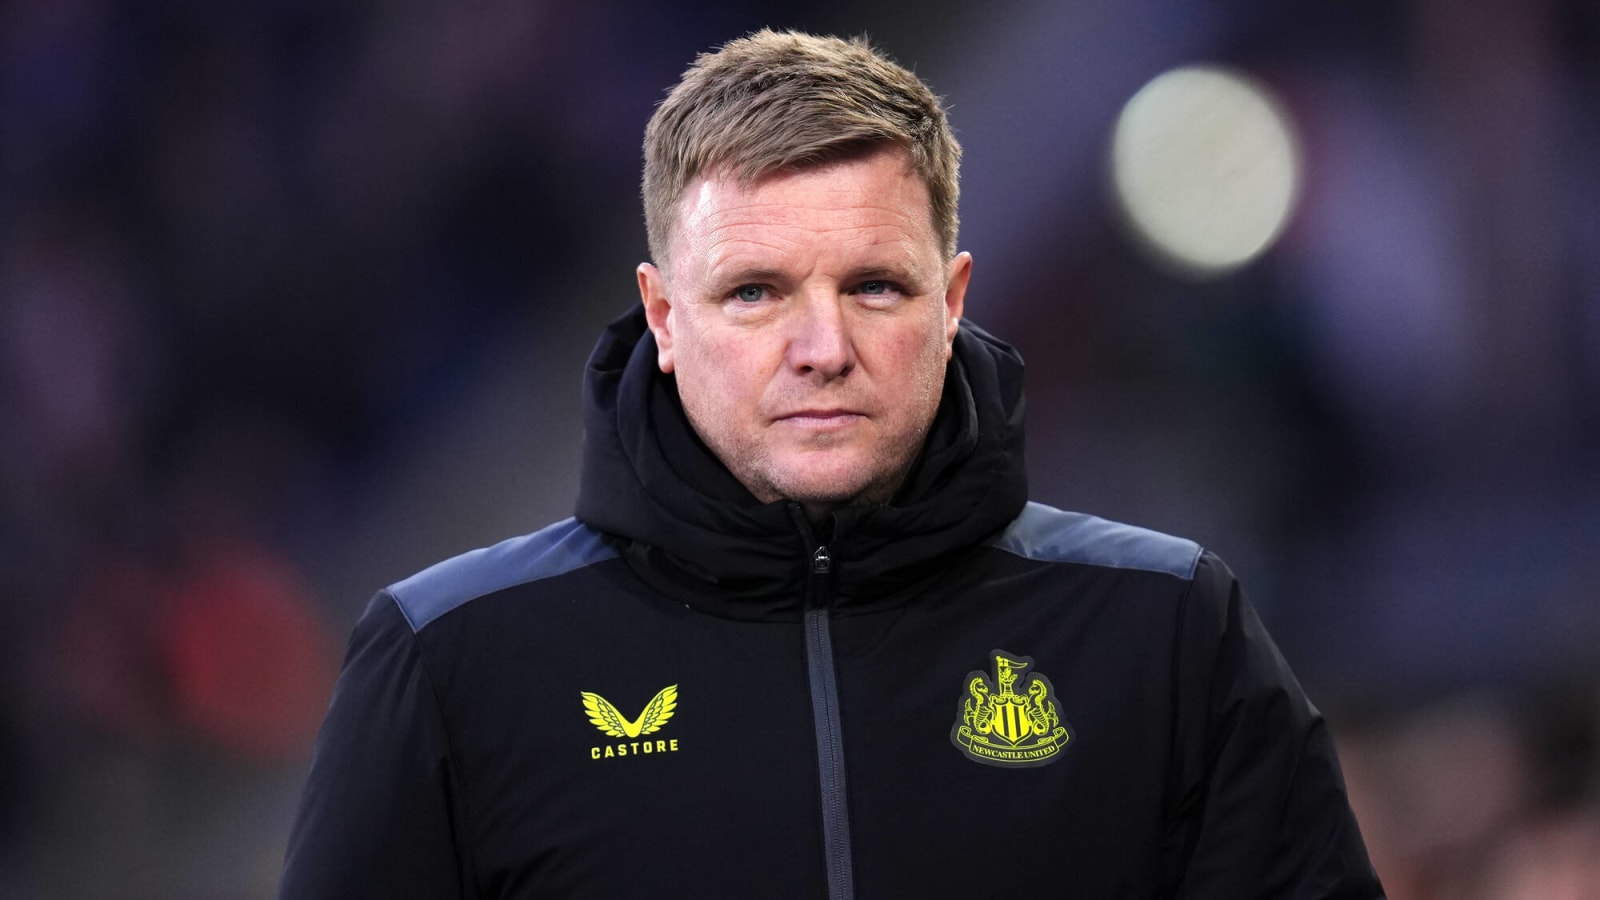 Eddie Howe responded to claims that Arsenal target Bruno Guimaraes waved goodbye to Newcastle fans